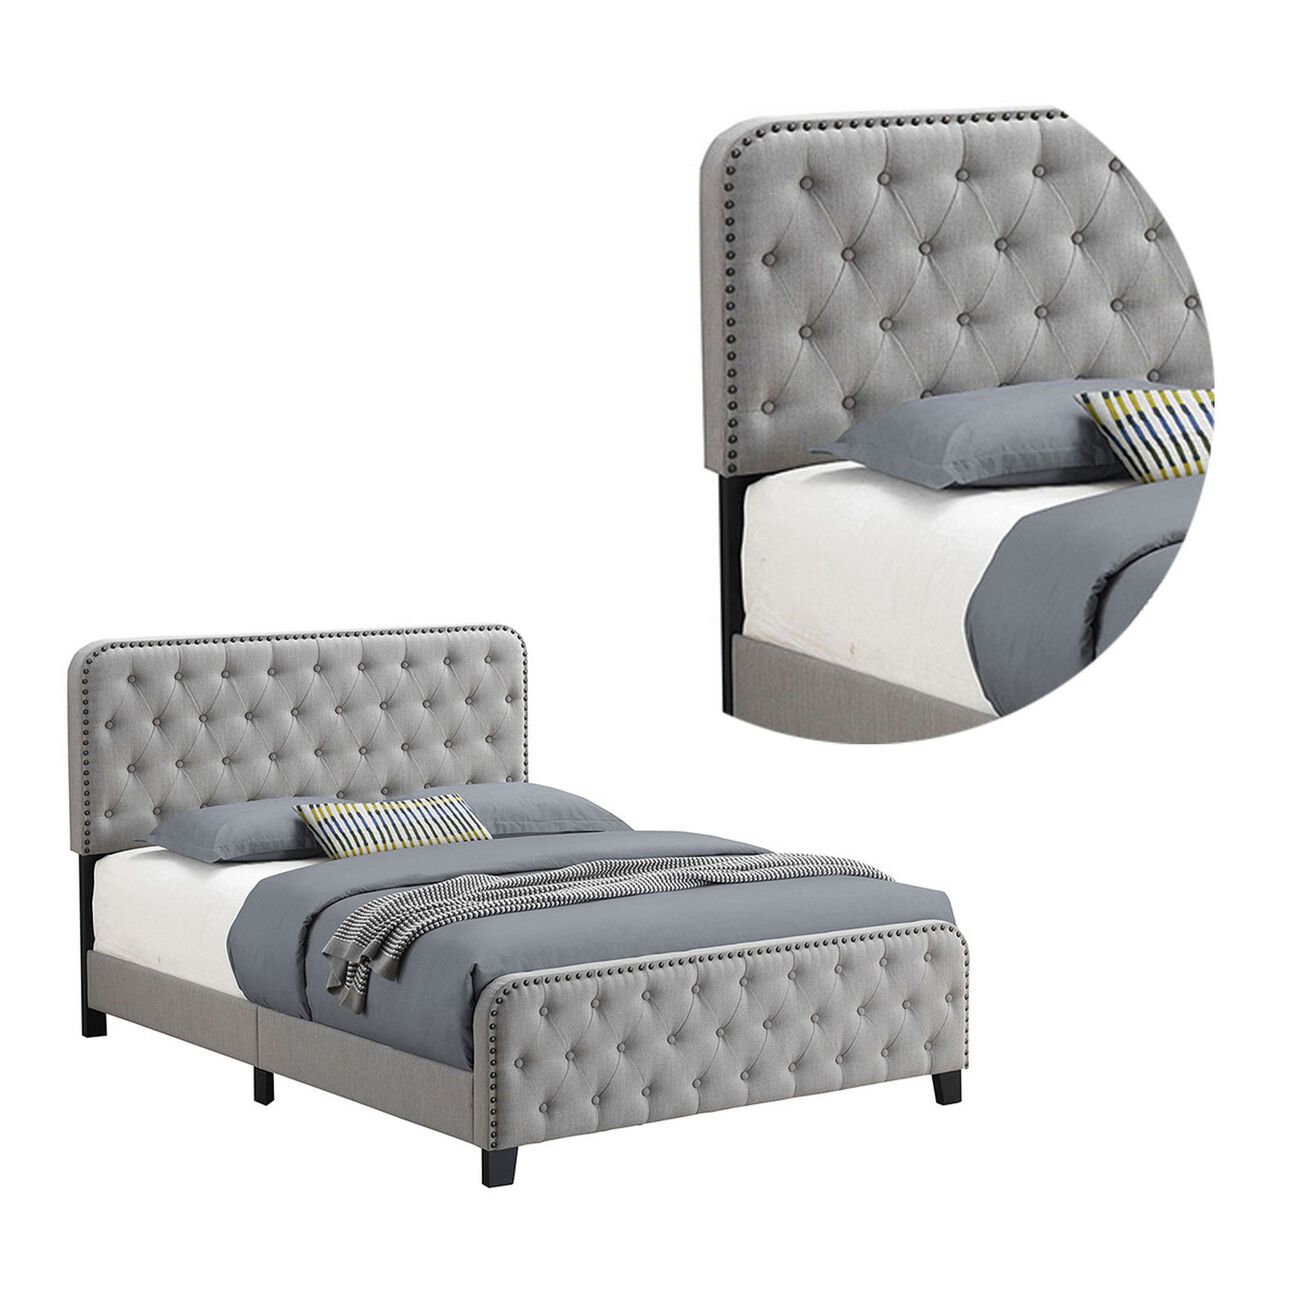 Tufted Queen Fabric Bed with Nailhead Trim, Gray